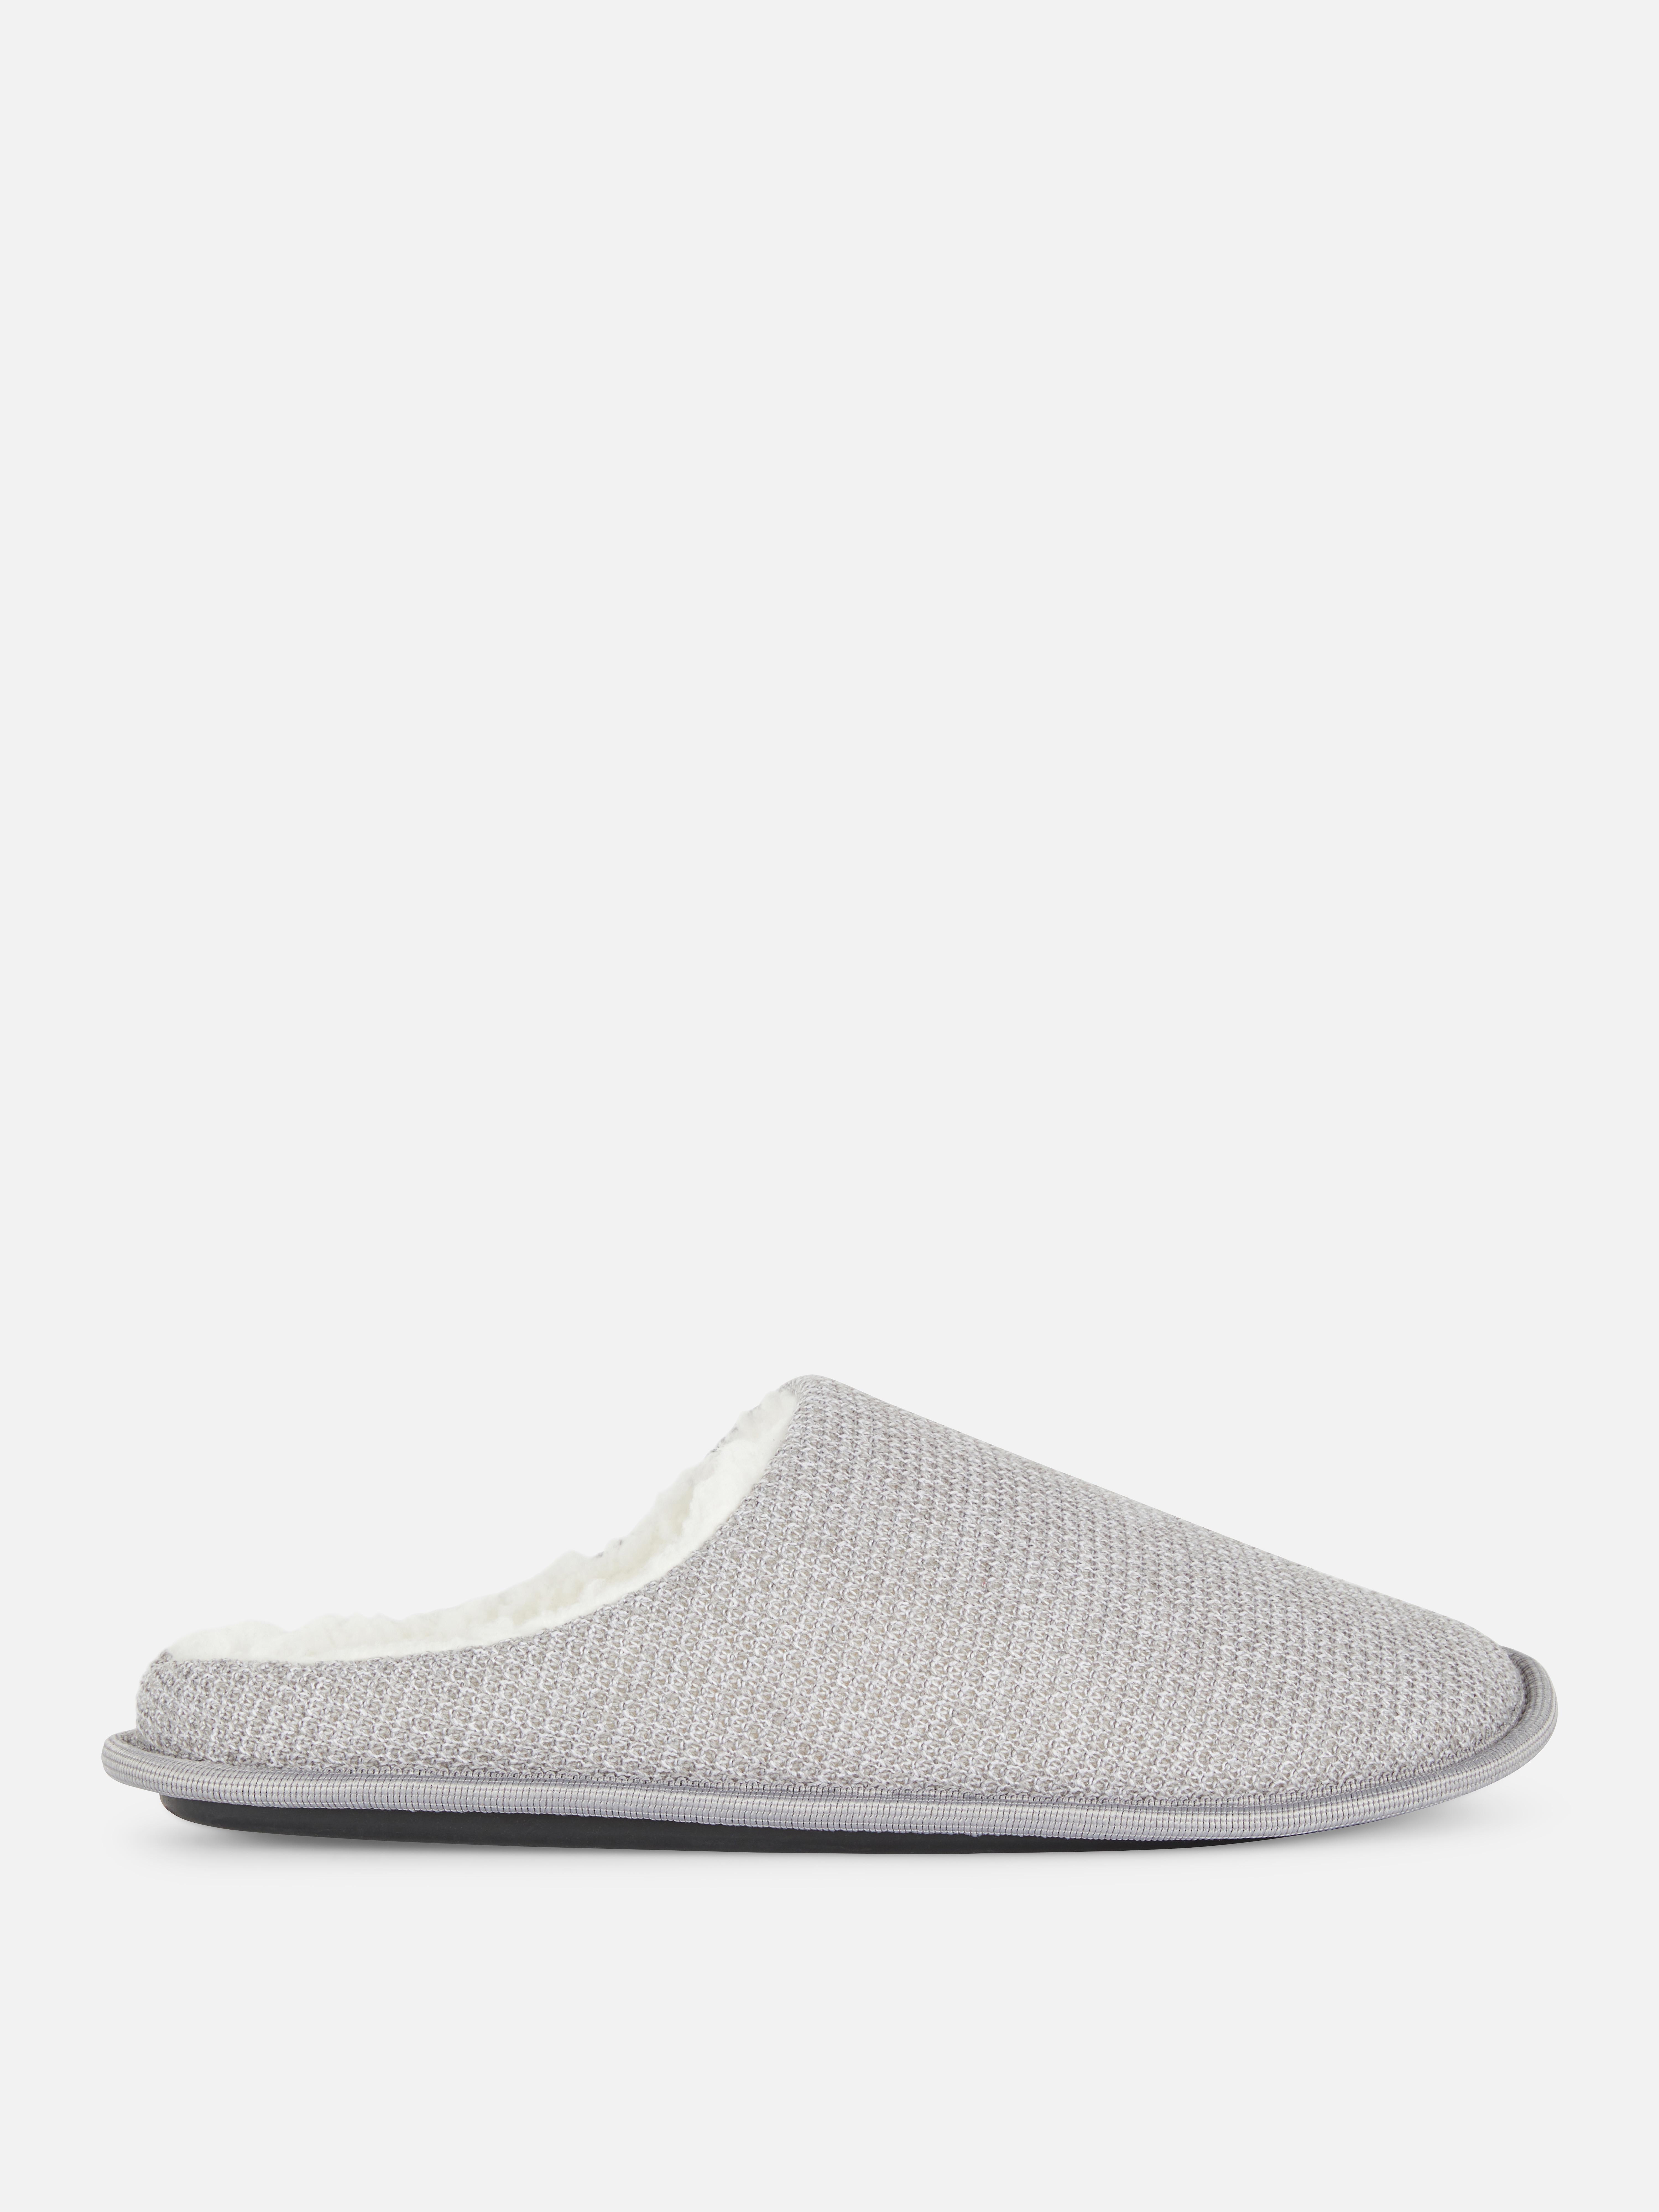 Lined Fabric Slippers | Men's Shoes & Boots | Our Men's Fashion Range ...